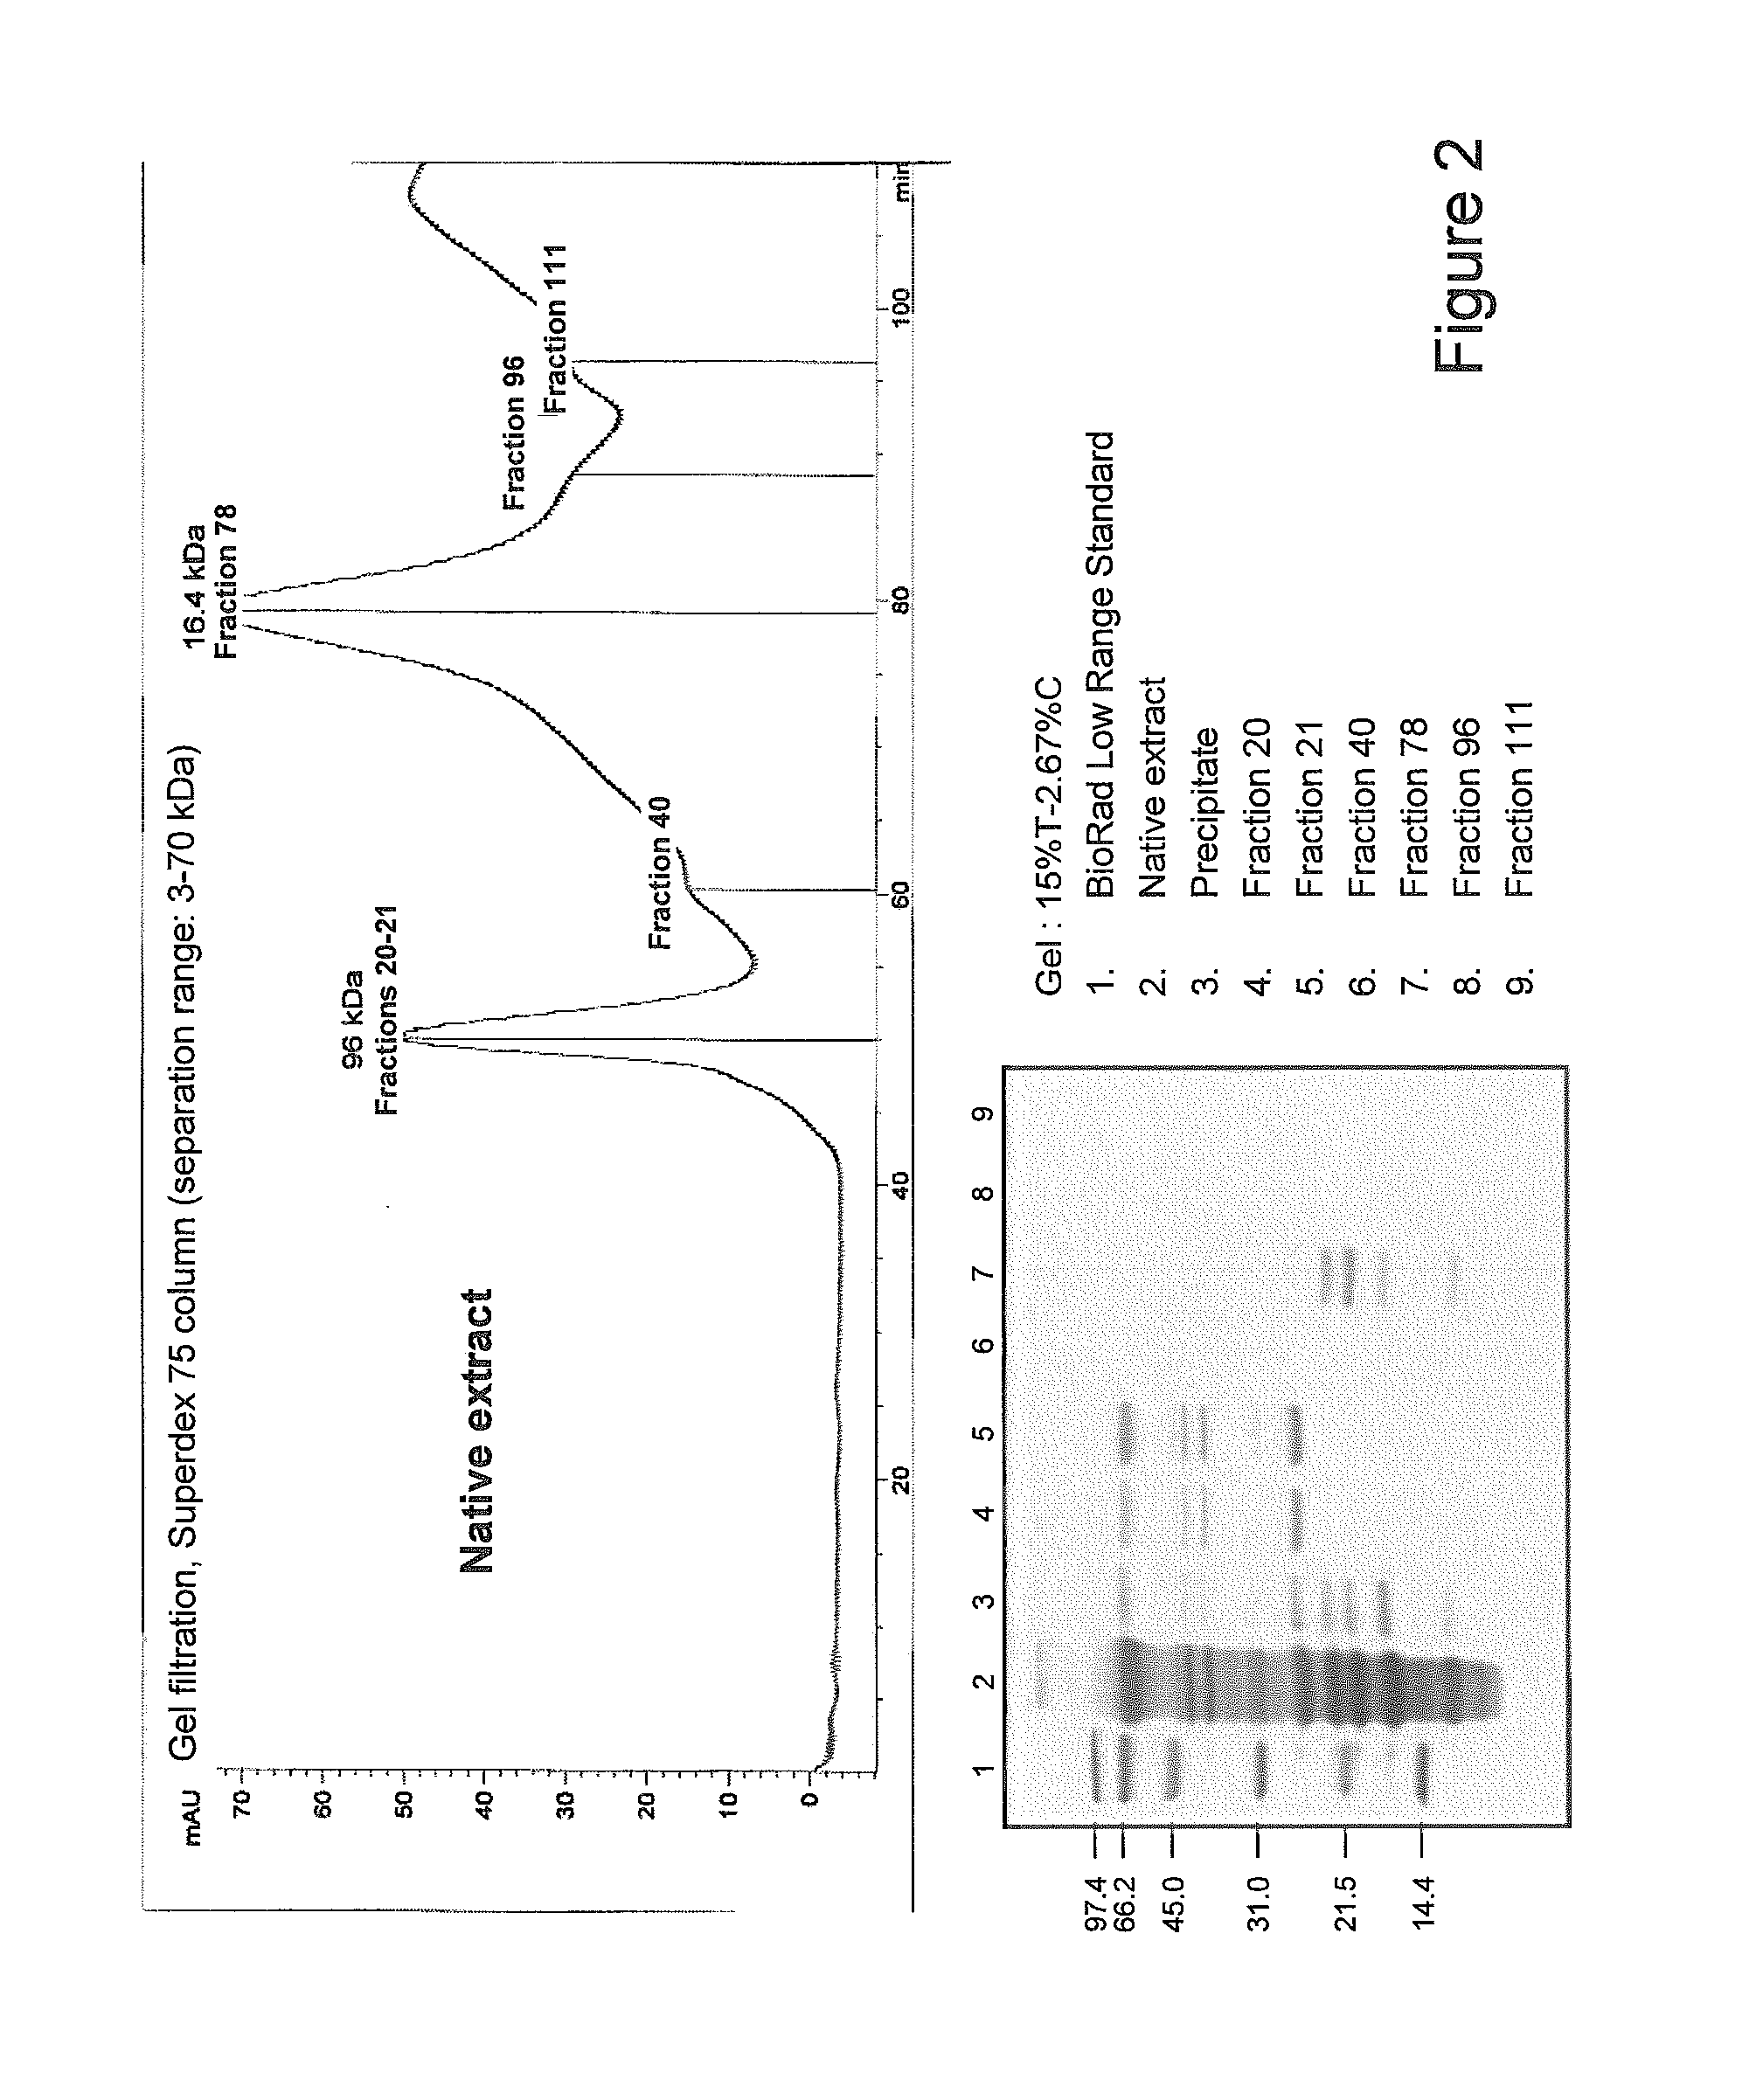 Process for producing an allergen extract